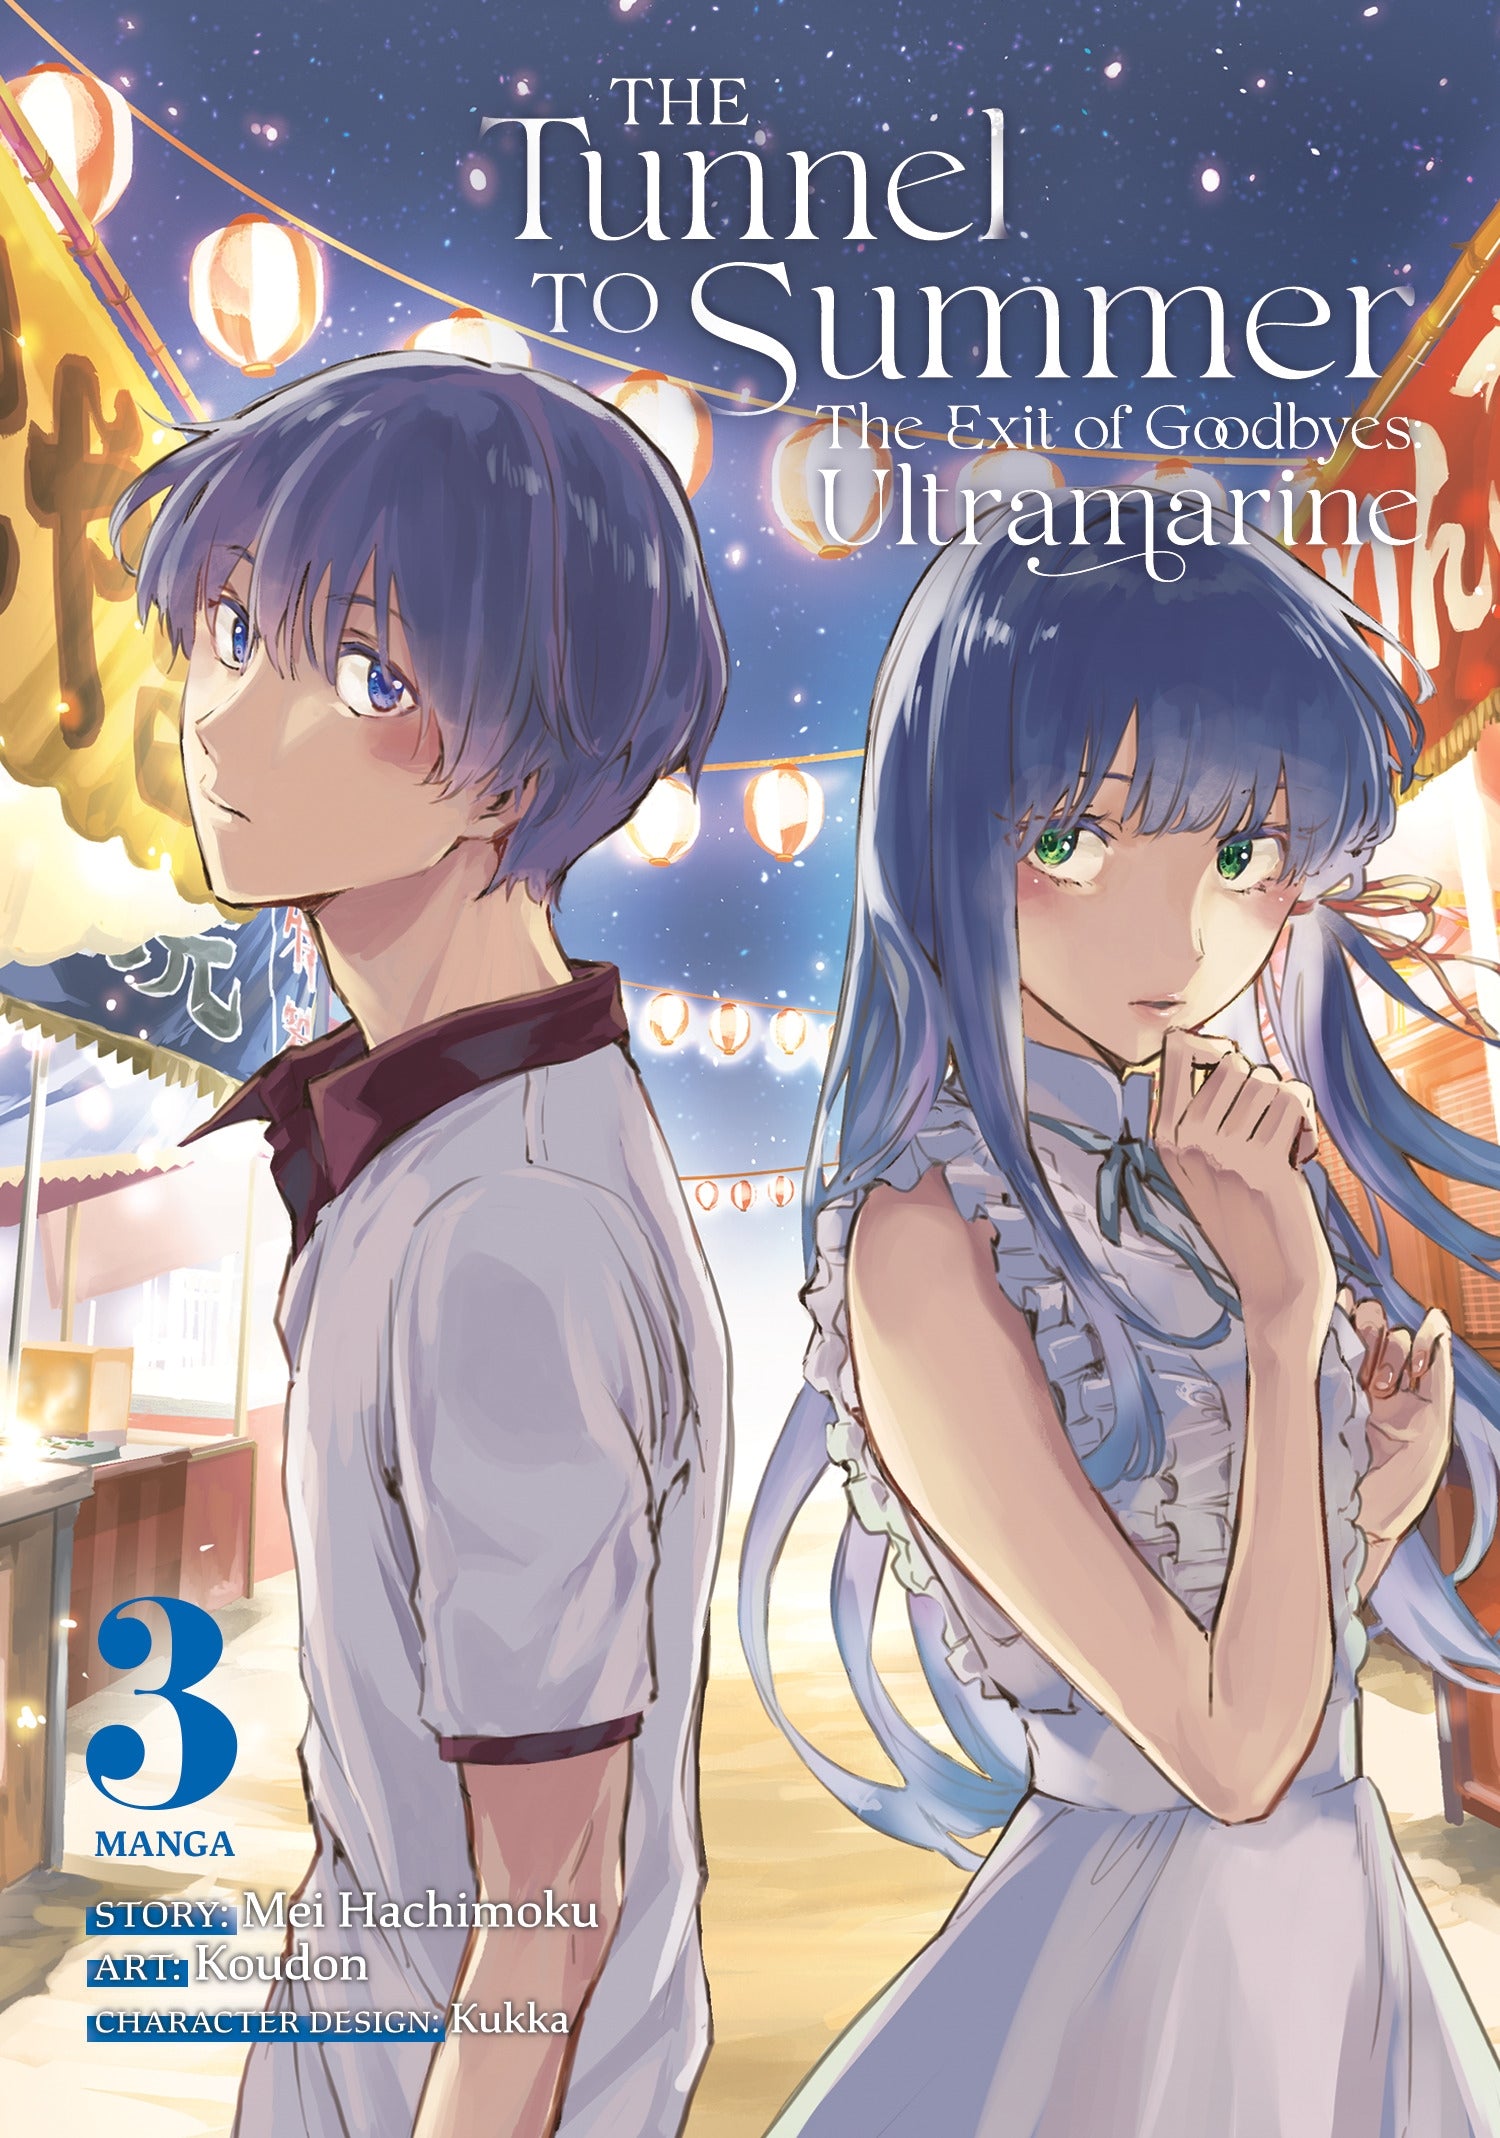 The Tunnel to Summer, the Exit of Goodbyes Ultramarine (Manga) - Vol. 3